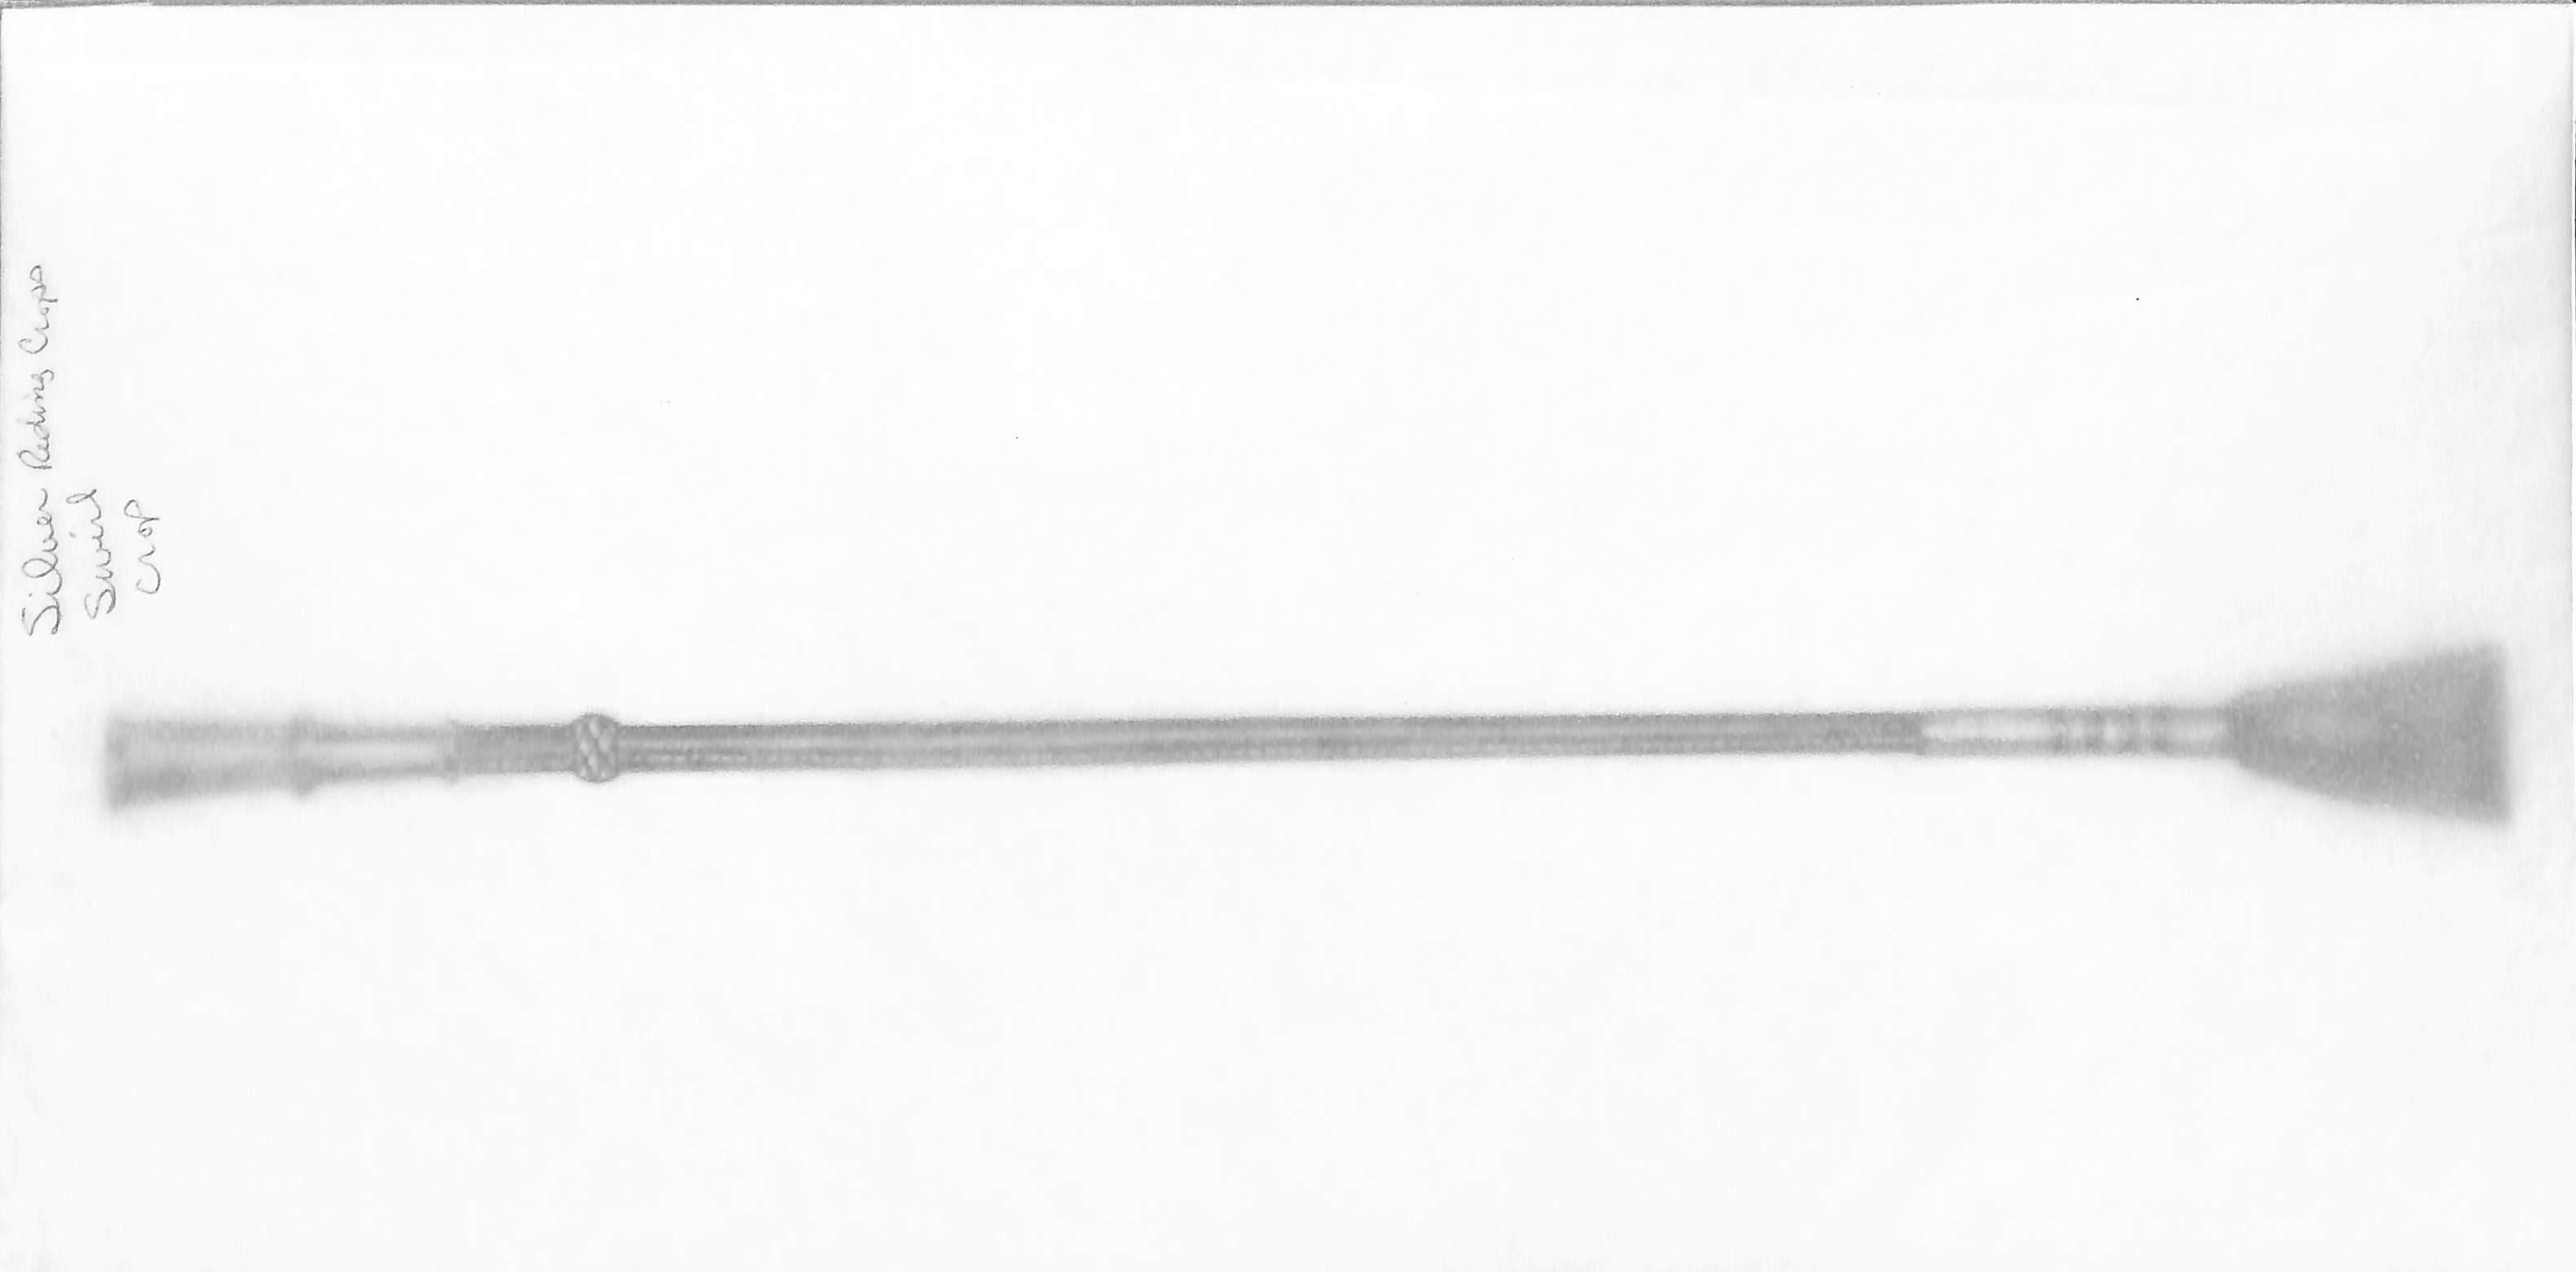 Silver Swirl Riding Crop Graphite Drawing - Art by Unknown